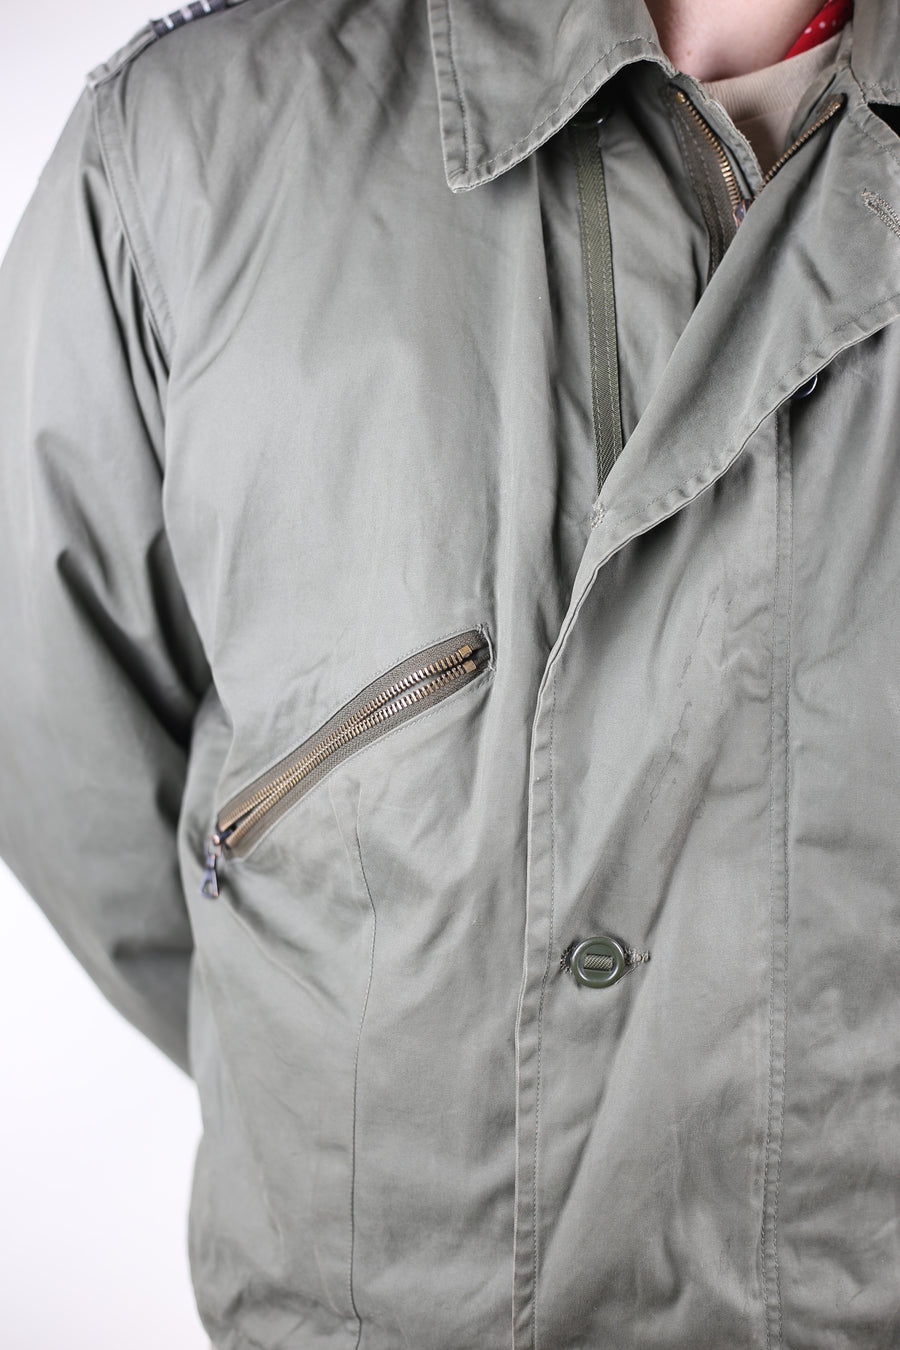 JACKET COLD WEATHER  MK 3 ROYAL AIR FORCE  - L -